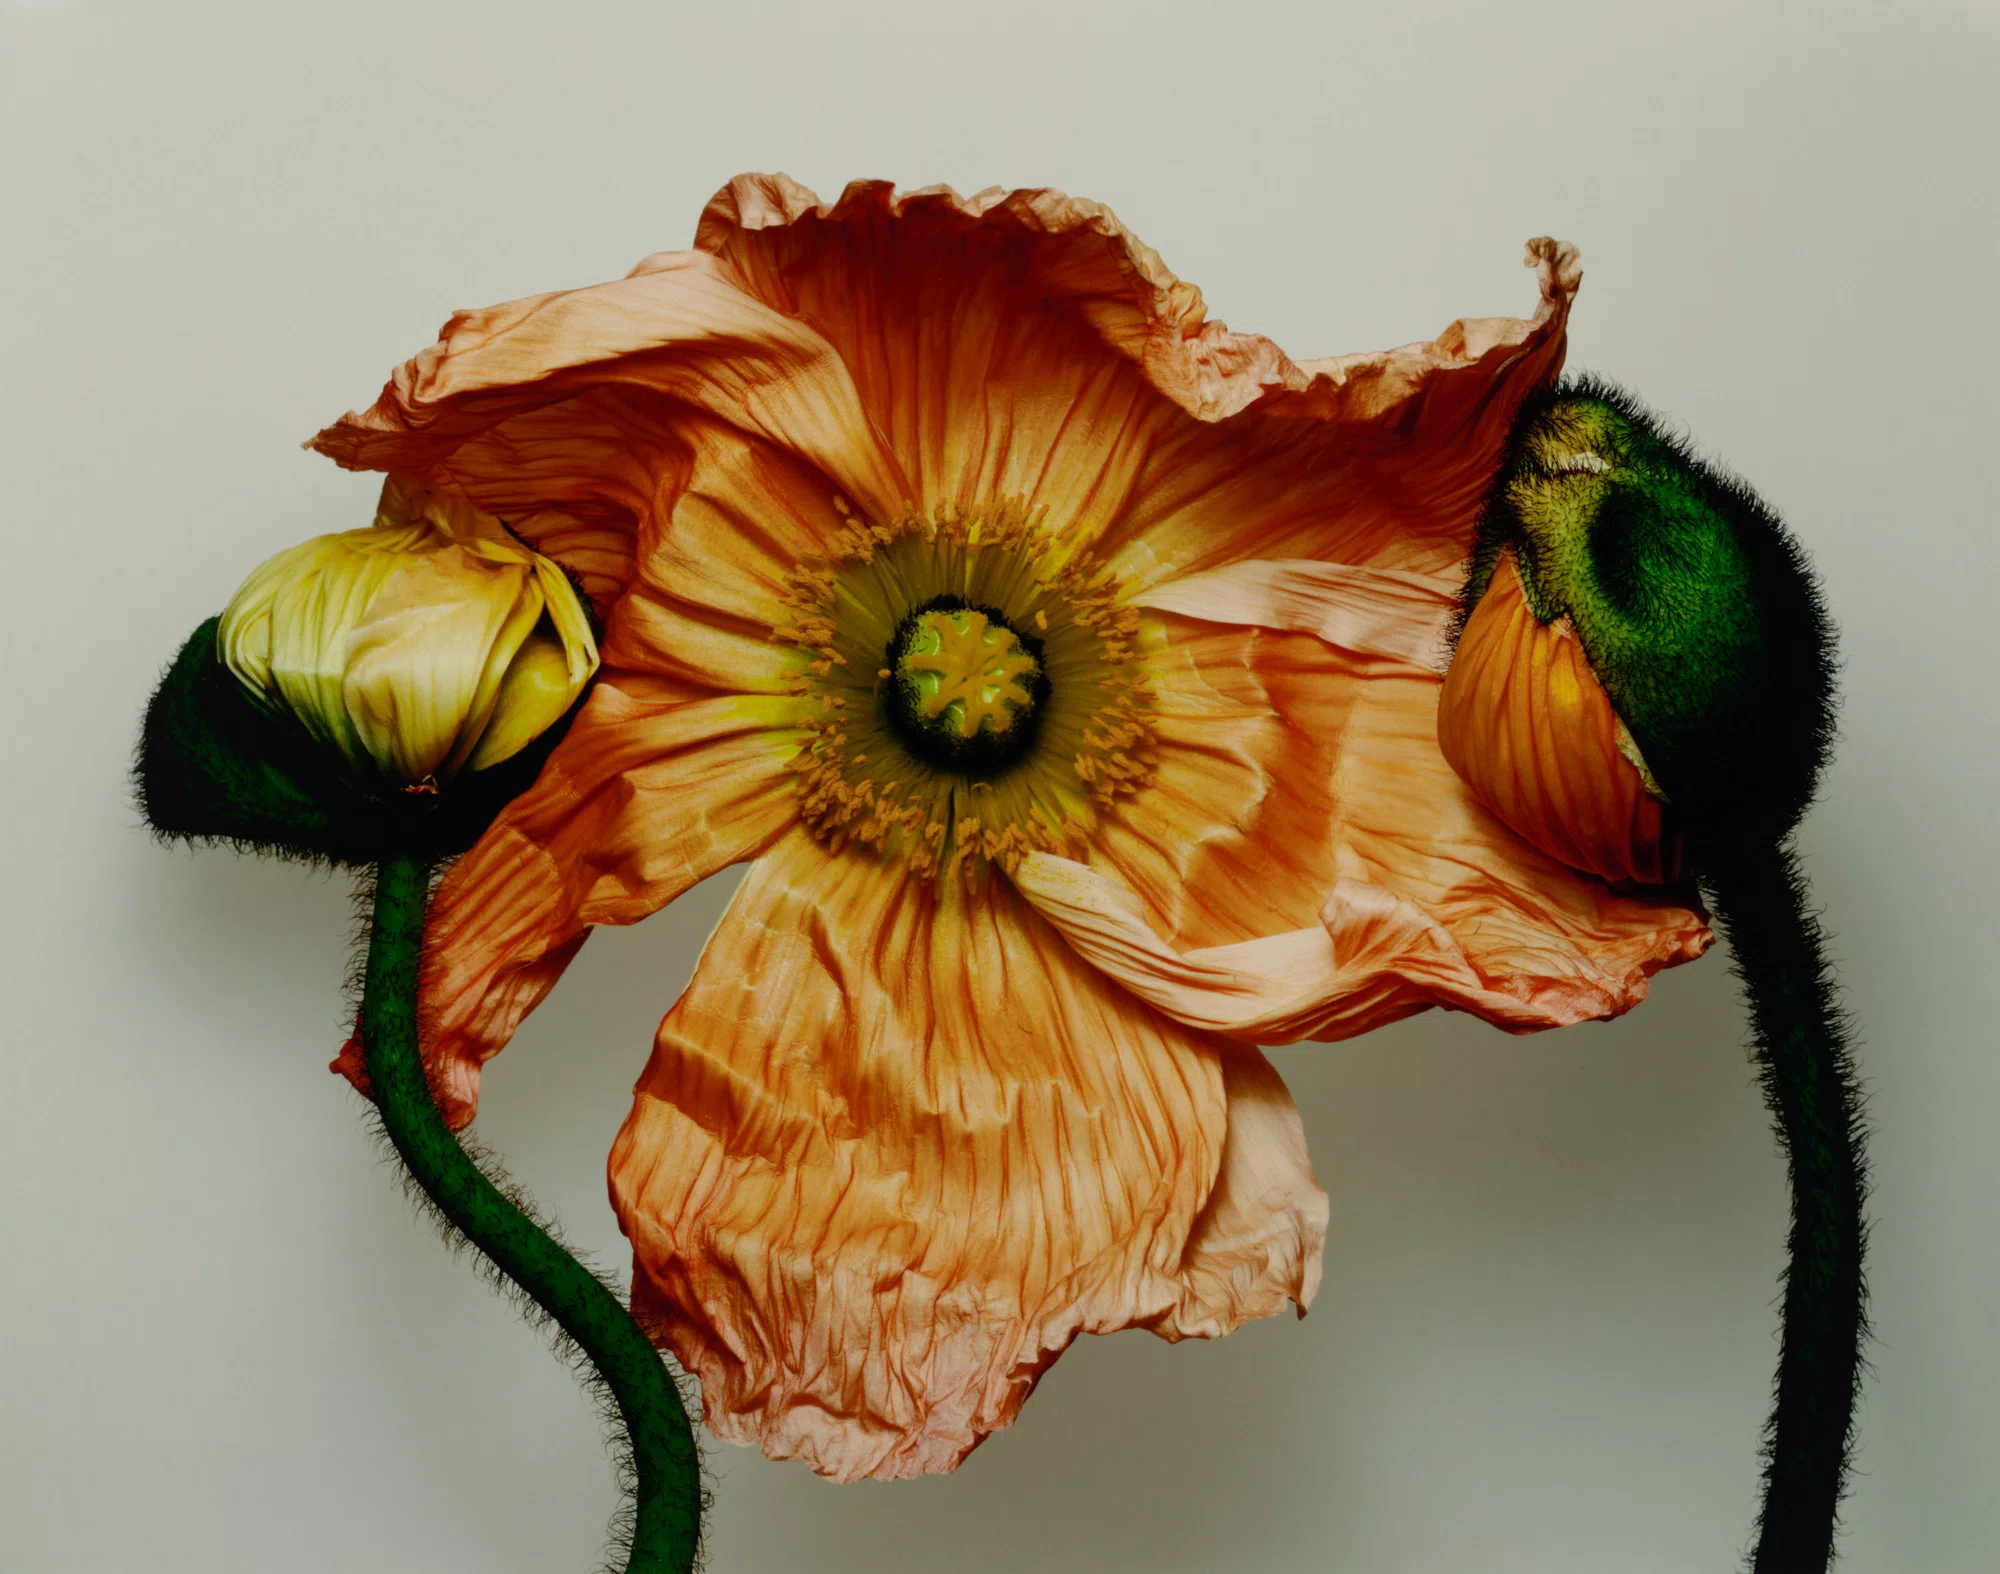 Irving Penn at Pace Gallery – Art and Cake